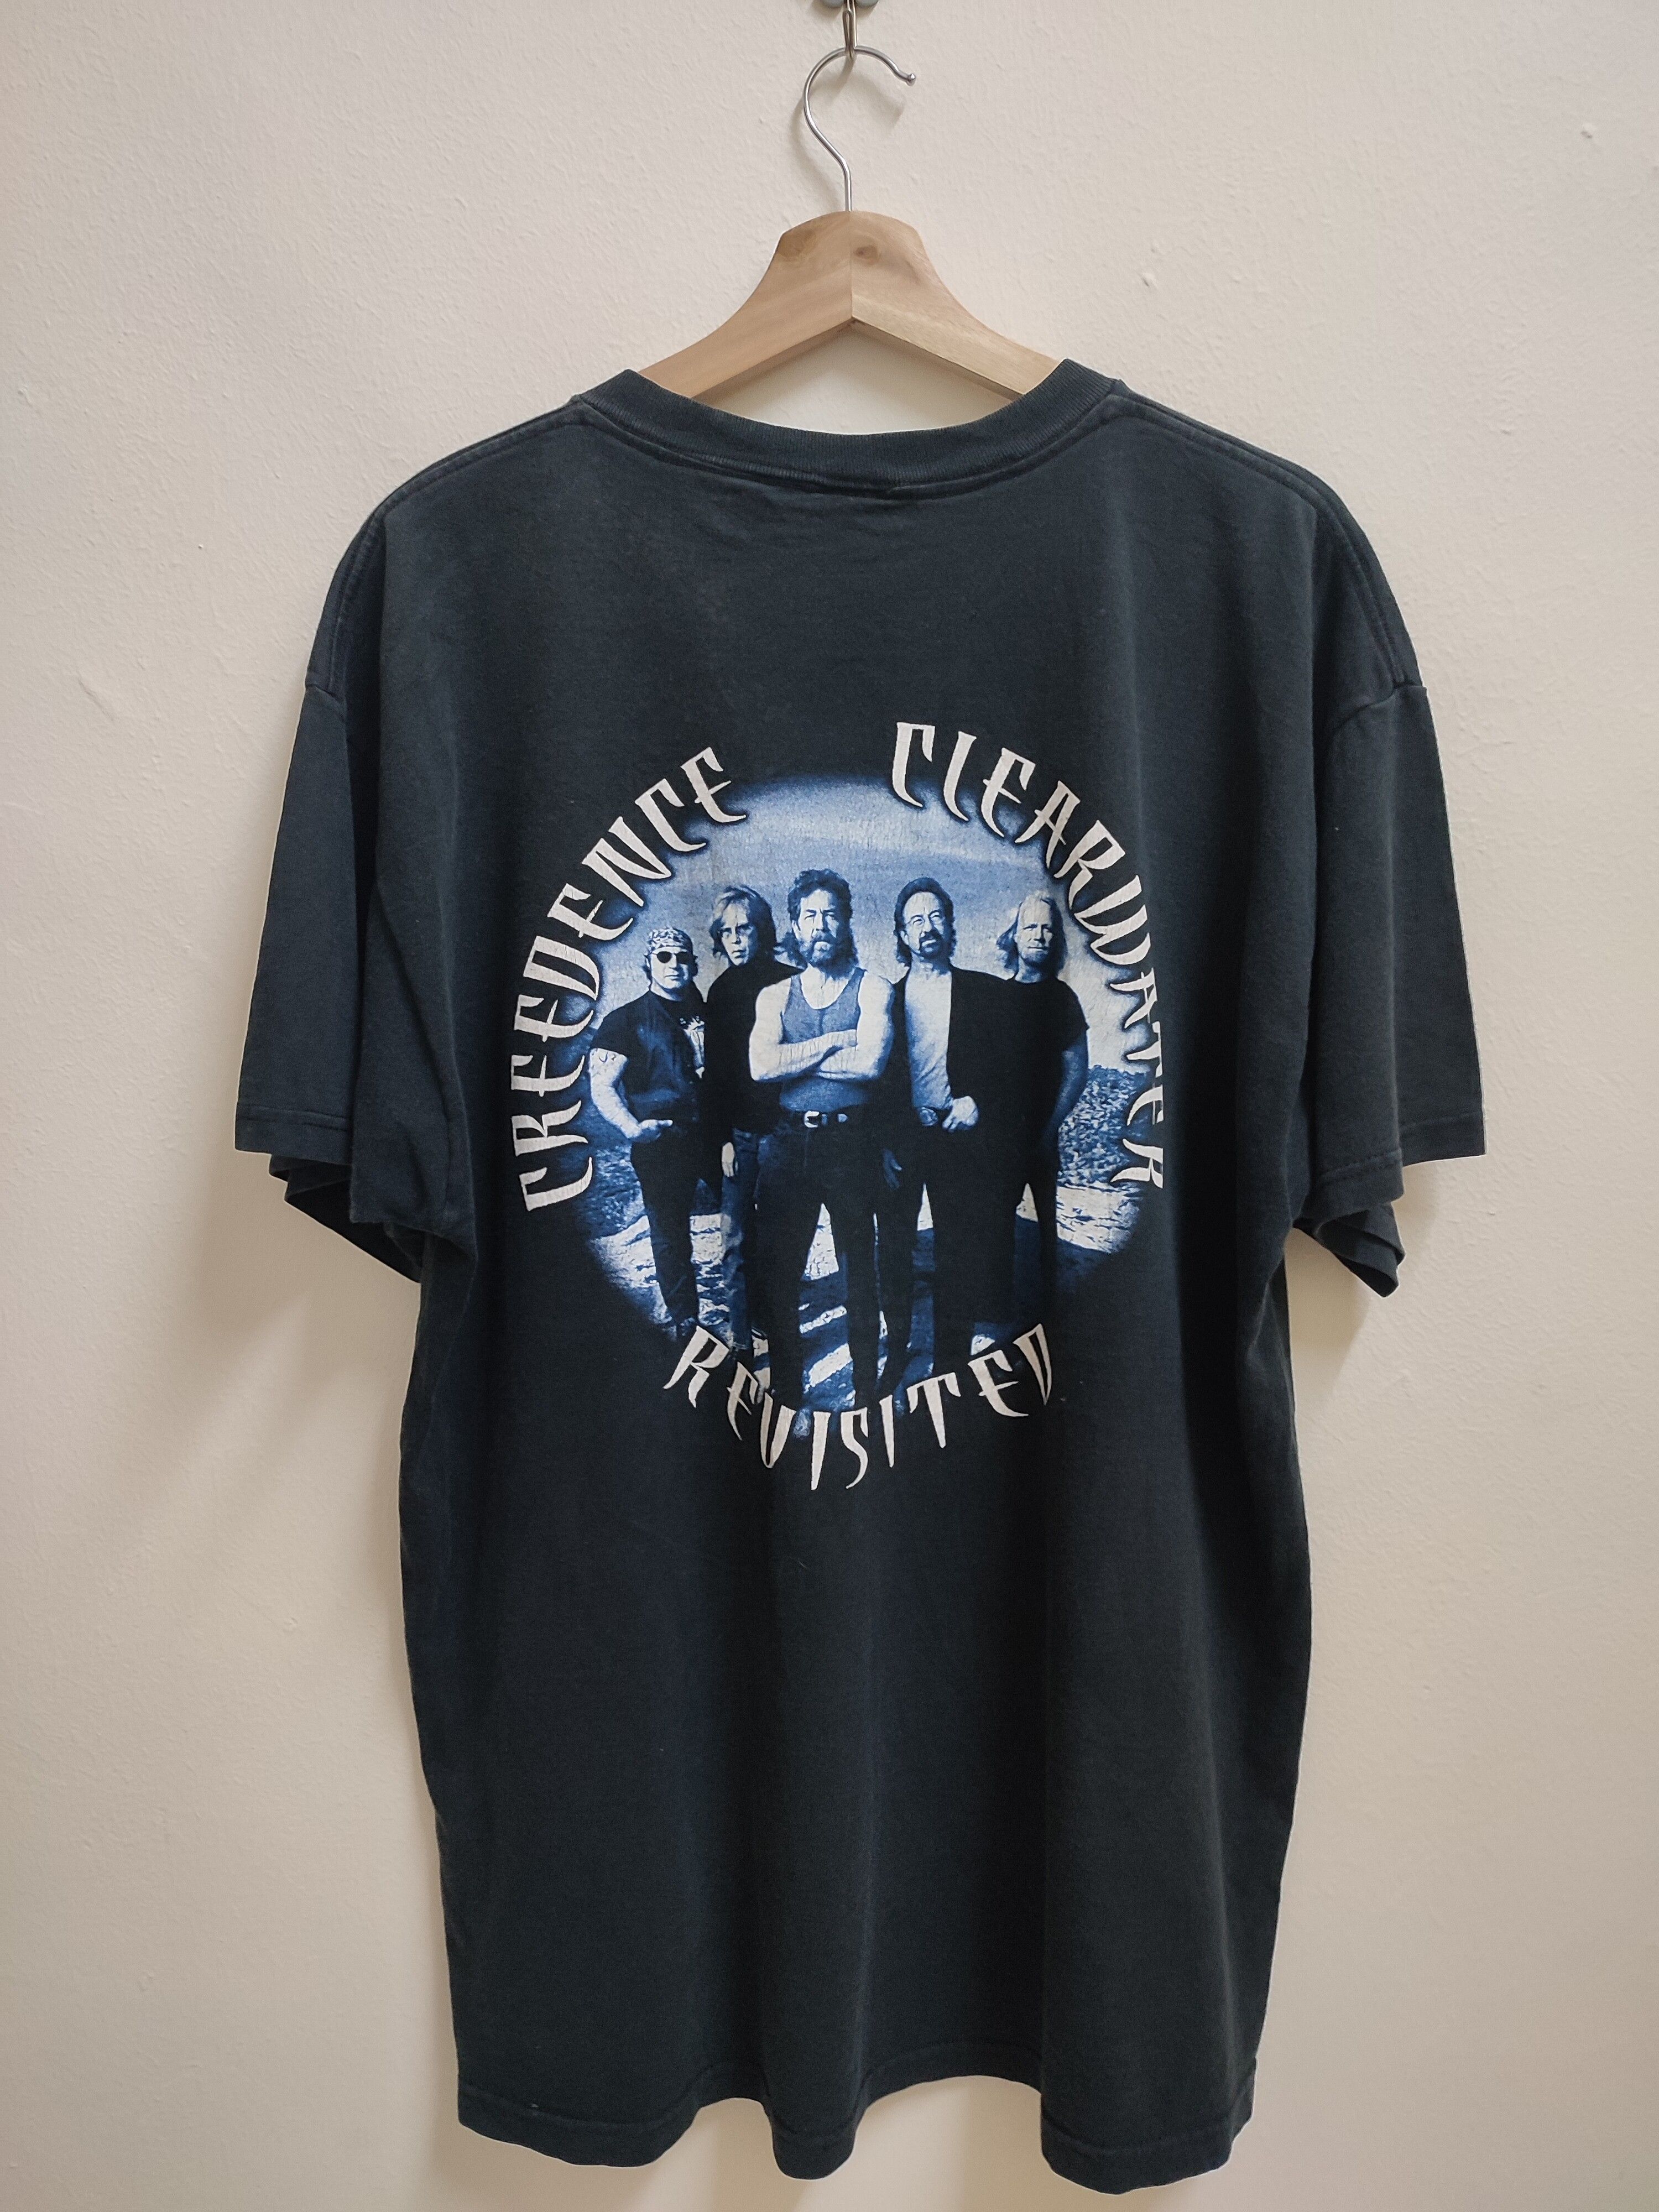 Vintage Rare Creedence Clearwater Revisited Band Tour Vintage Tee Size US XL / EU 56 / 4 - 2 Preview